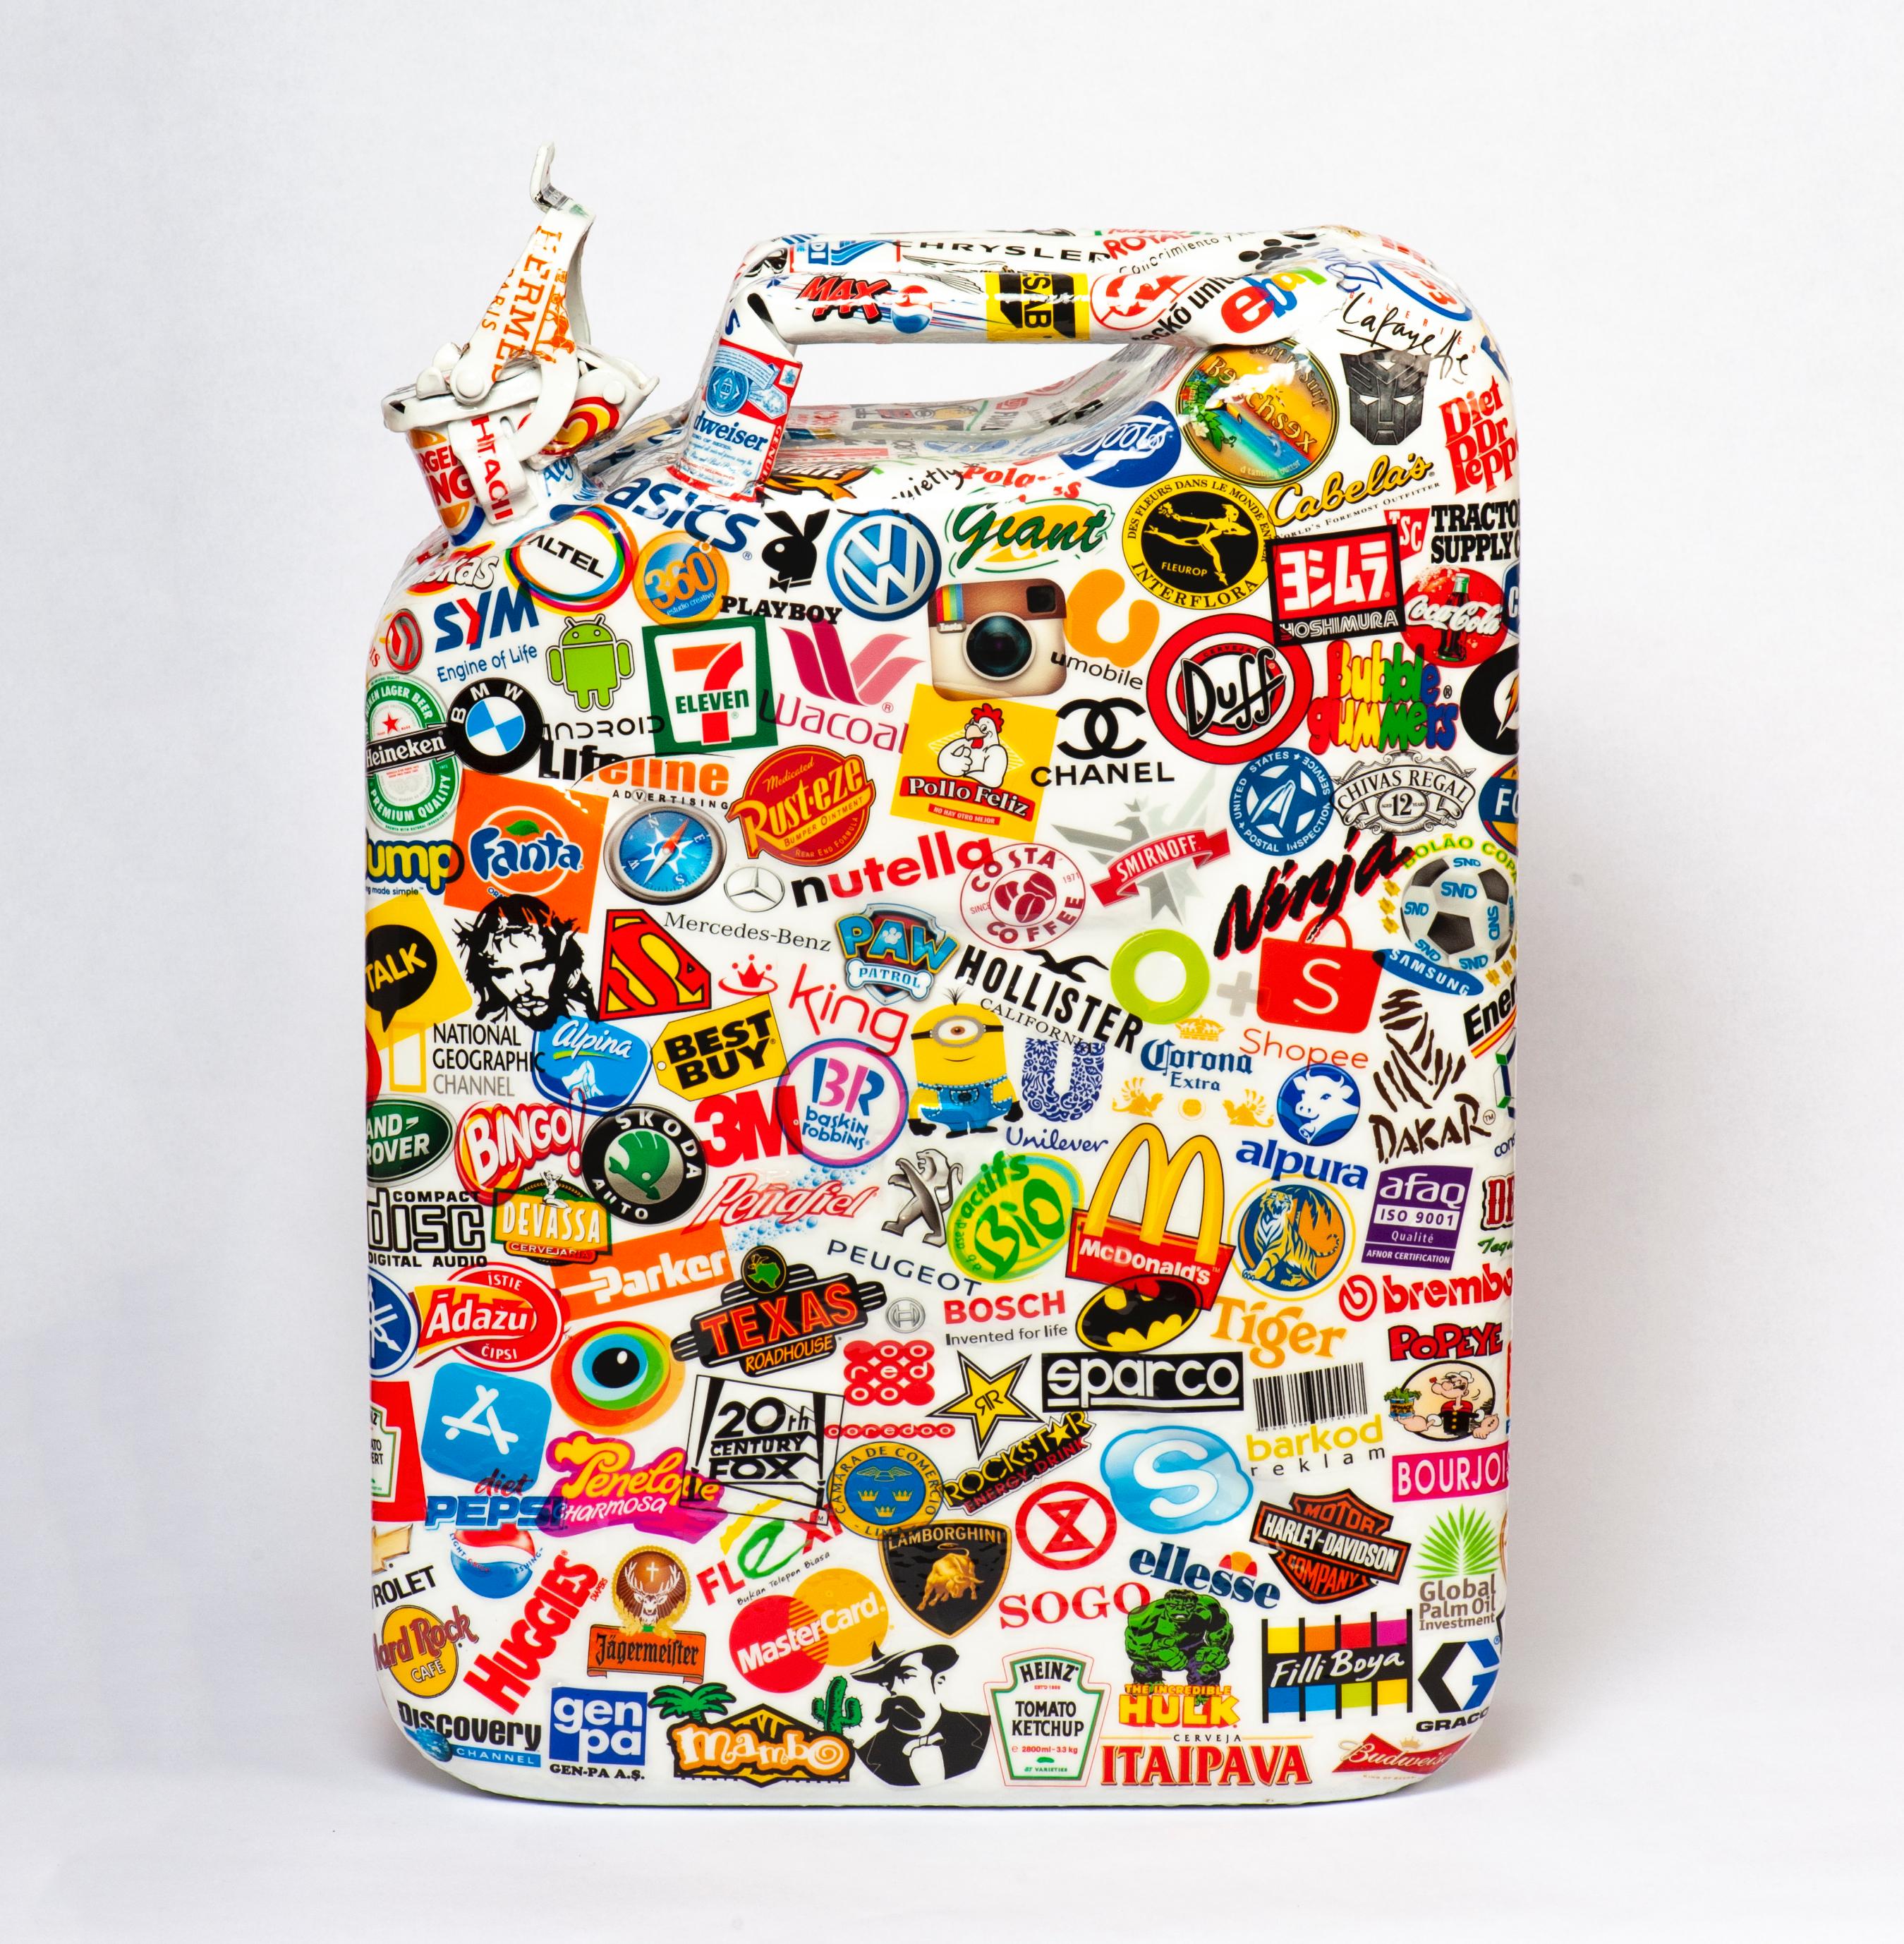 Metal Jerrycan Sculpture with Sticker Ornaments - Mixed Media Art by Alain Brioudes